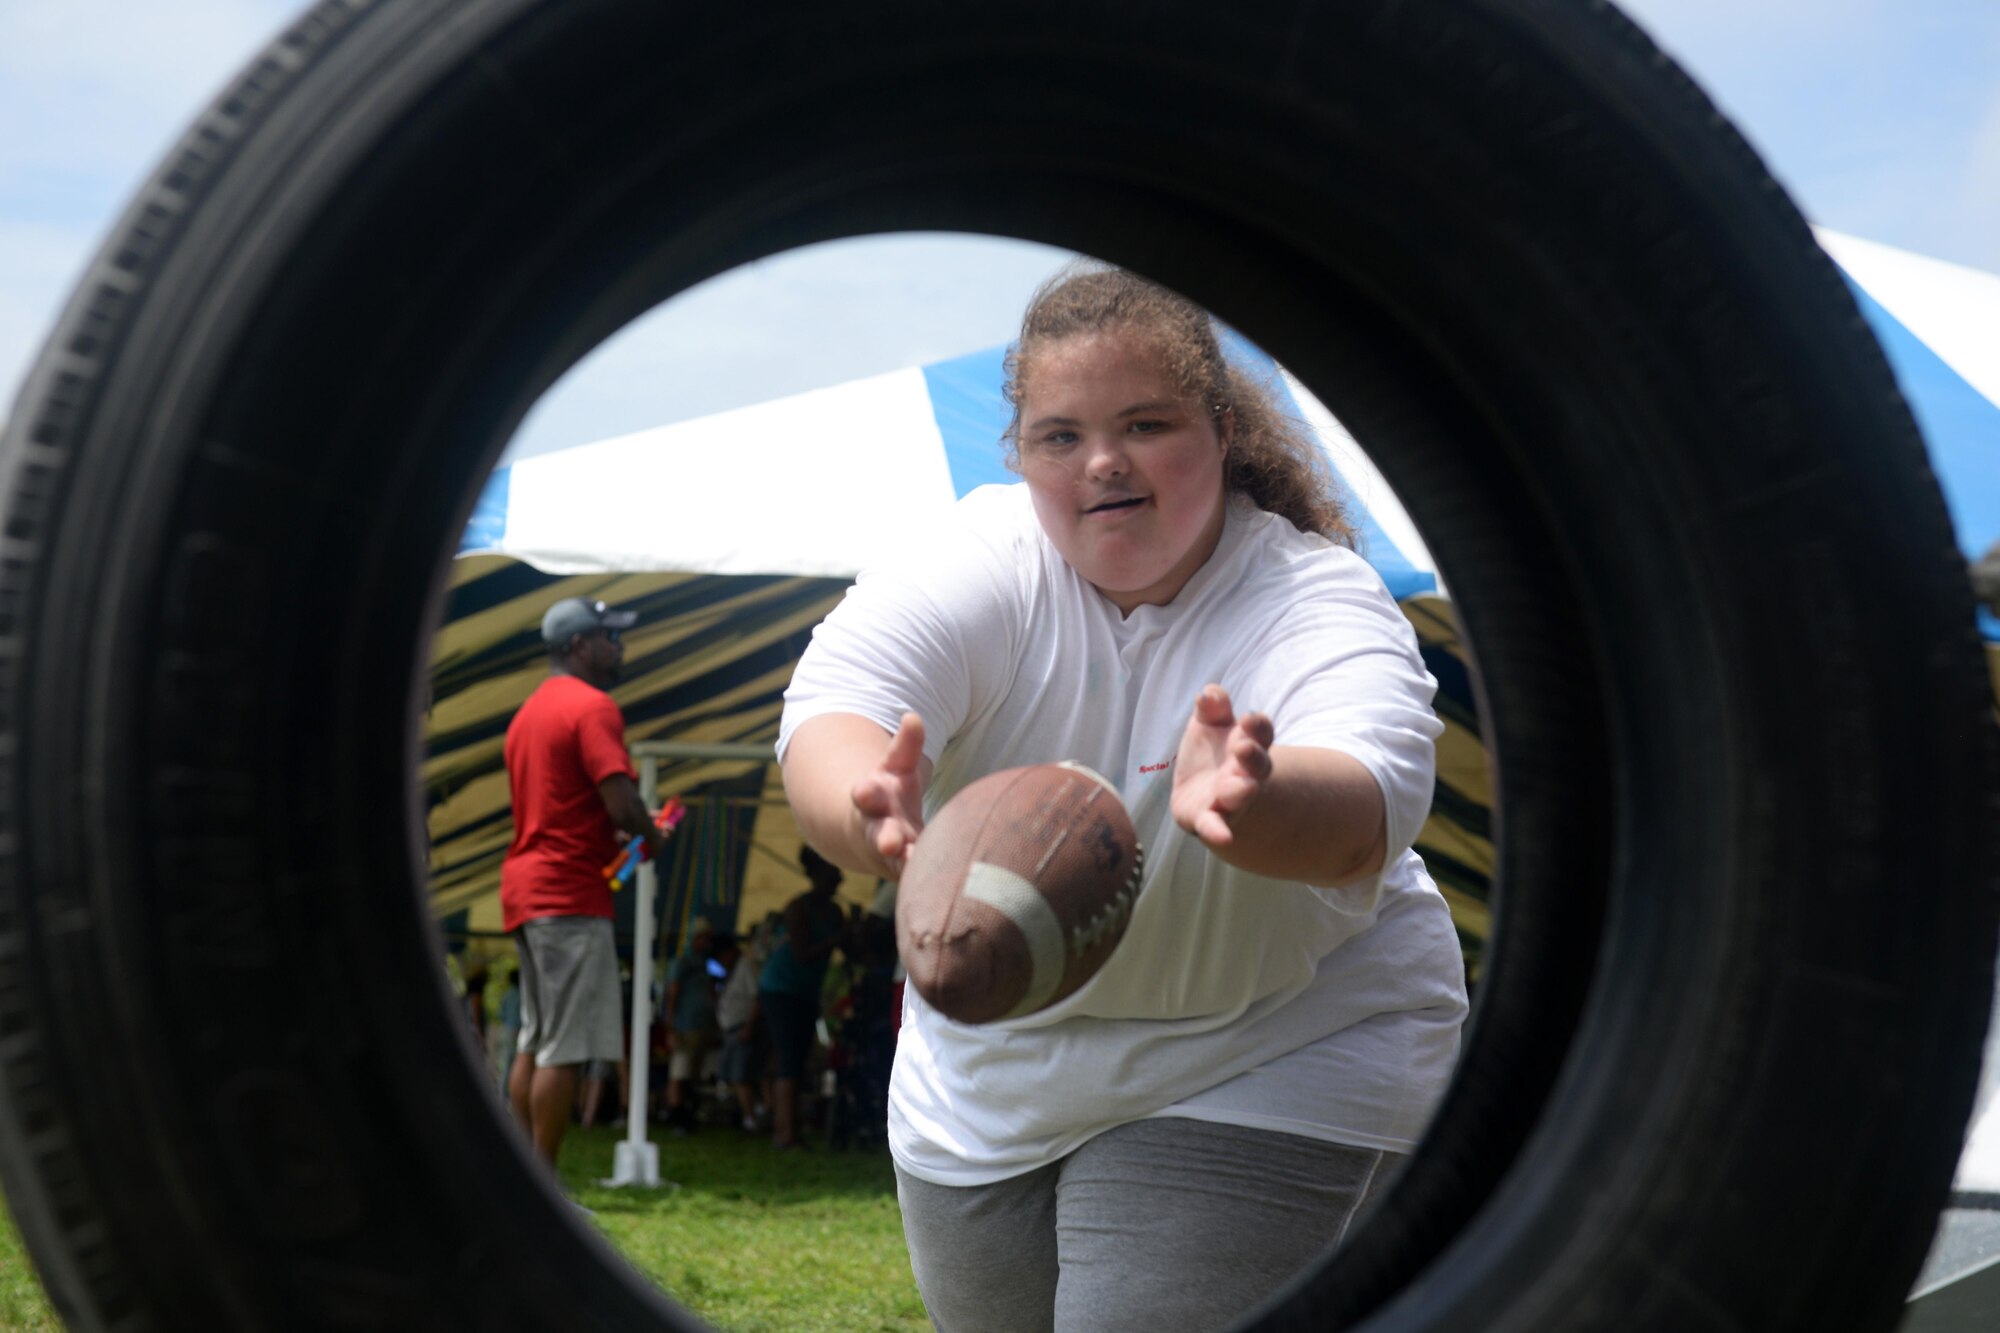 Madyson McManus, Area 3 athlete, throws a football through a tire during the Special Olympics Mississippi 2017 Summer Games at Olympic Village May 20, 2017, on Keesler Air Force Base, Miss. Keesler hosted more than 3,200 athletes, directors, coaches, family members and volunteers spanning over 16 regions across Mississippi for the 31st year. (U.S. Air Force photo by Airman 1st Class Travis Beihl)